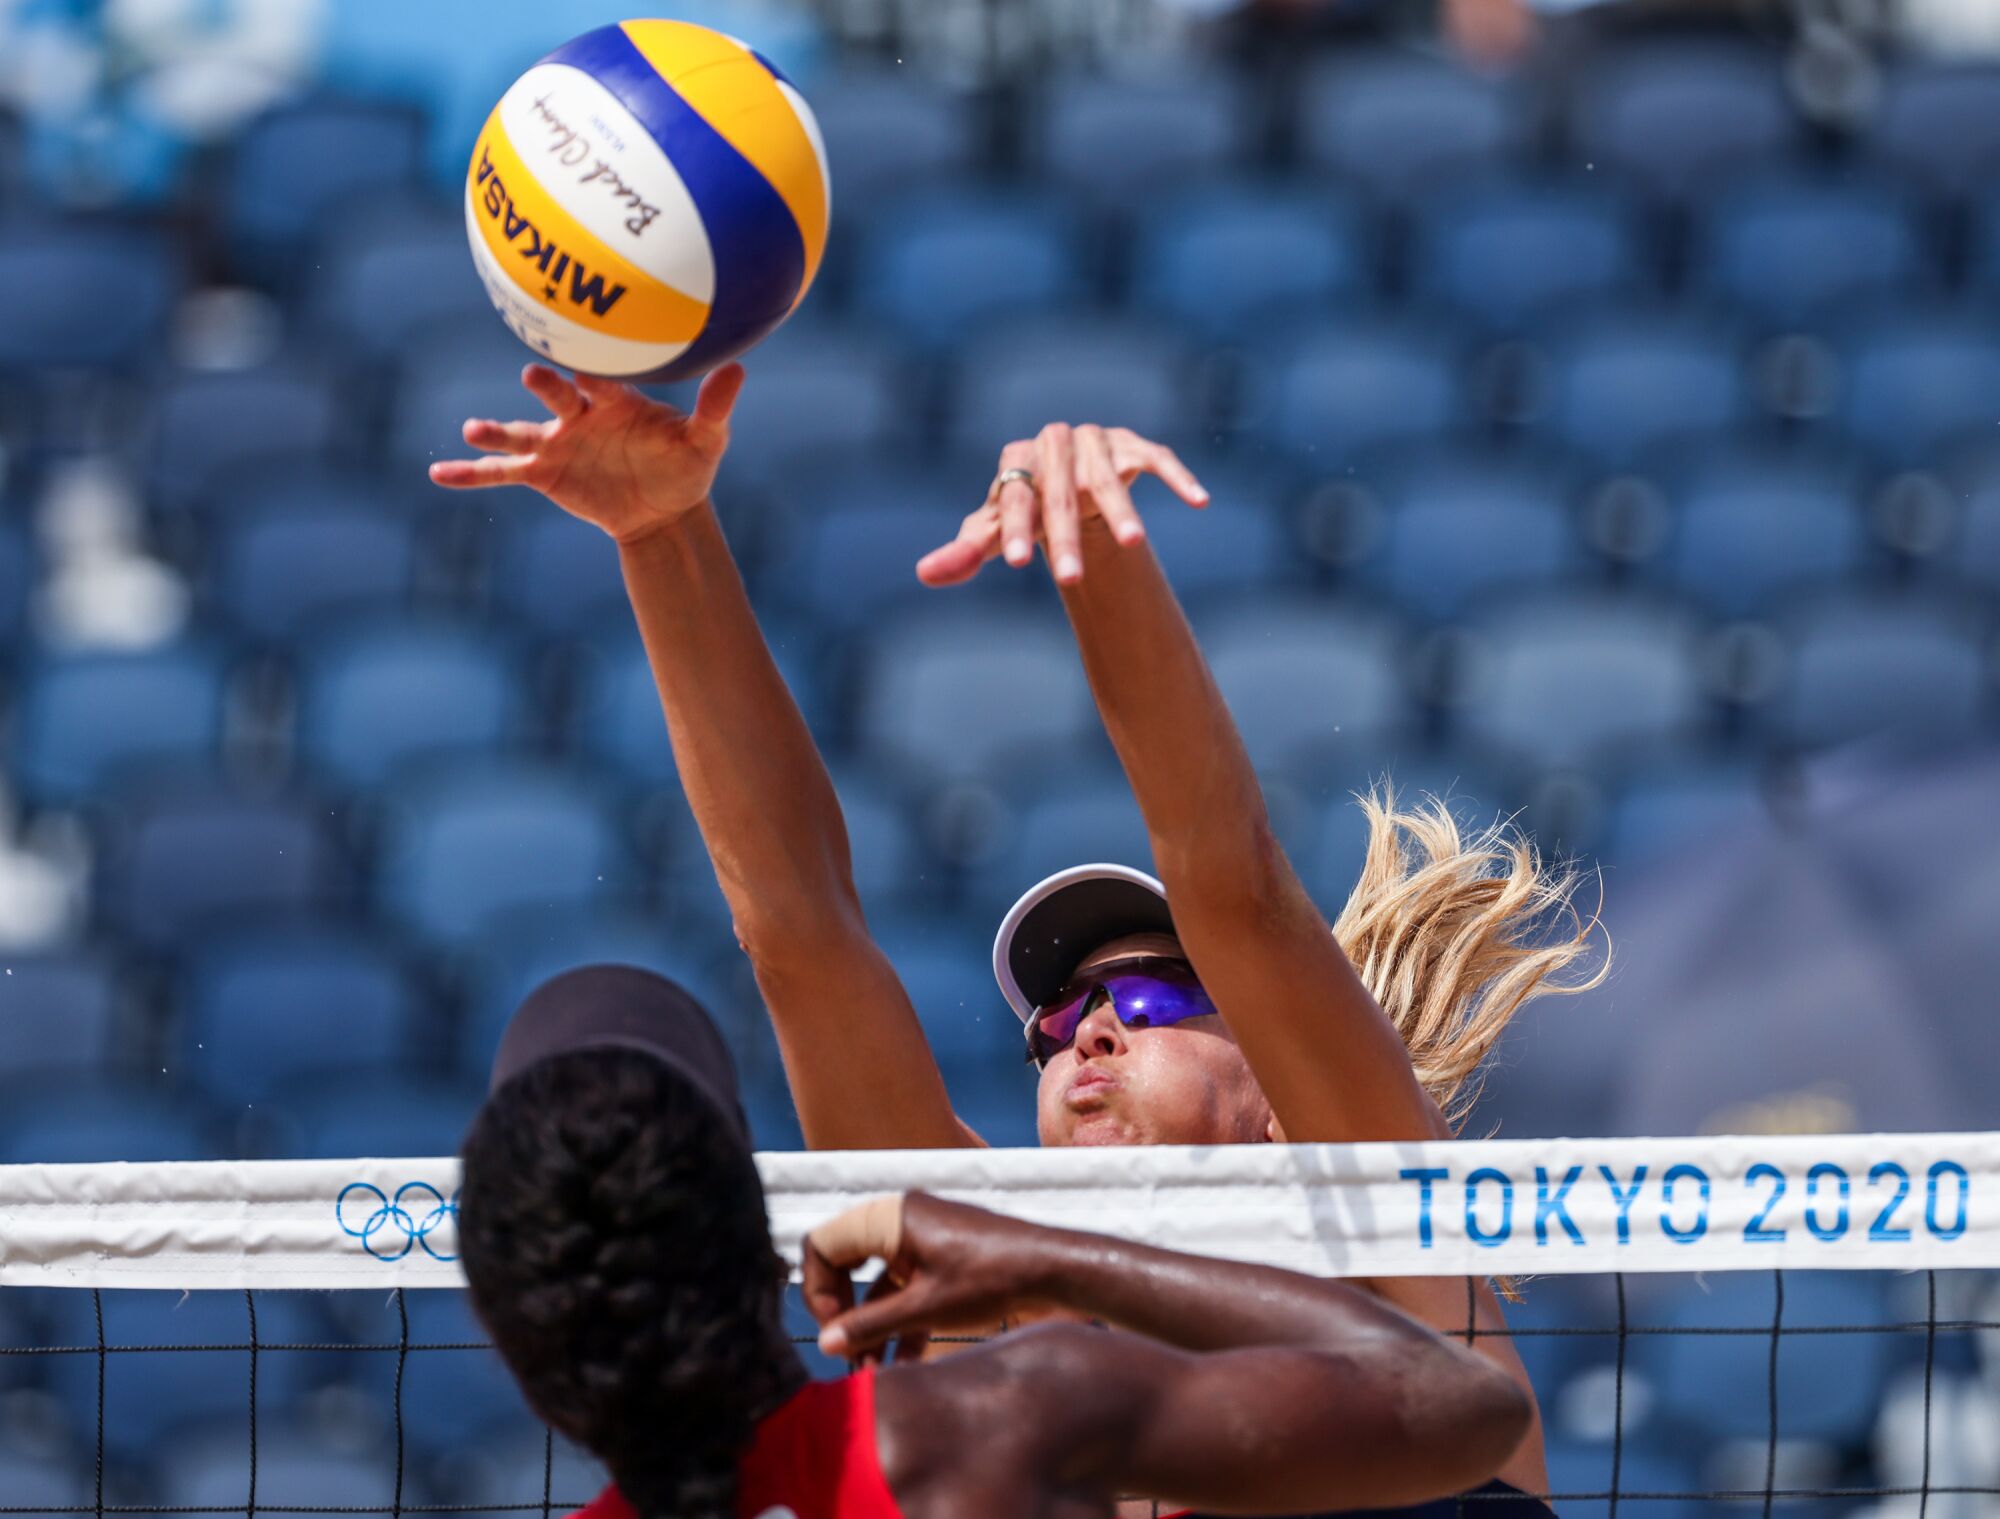 Two women at the net with the volleyball above.